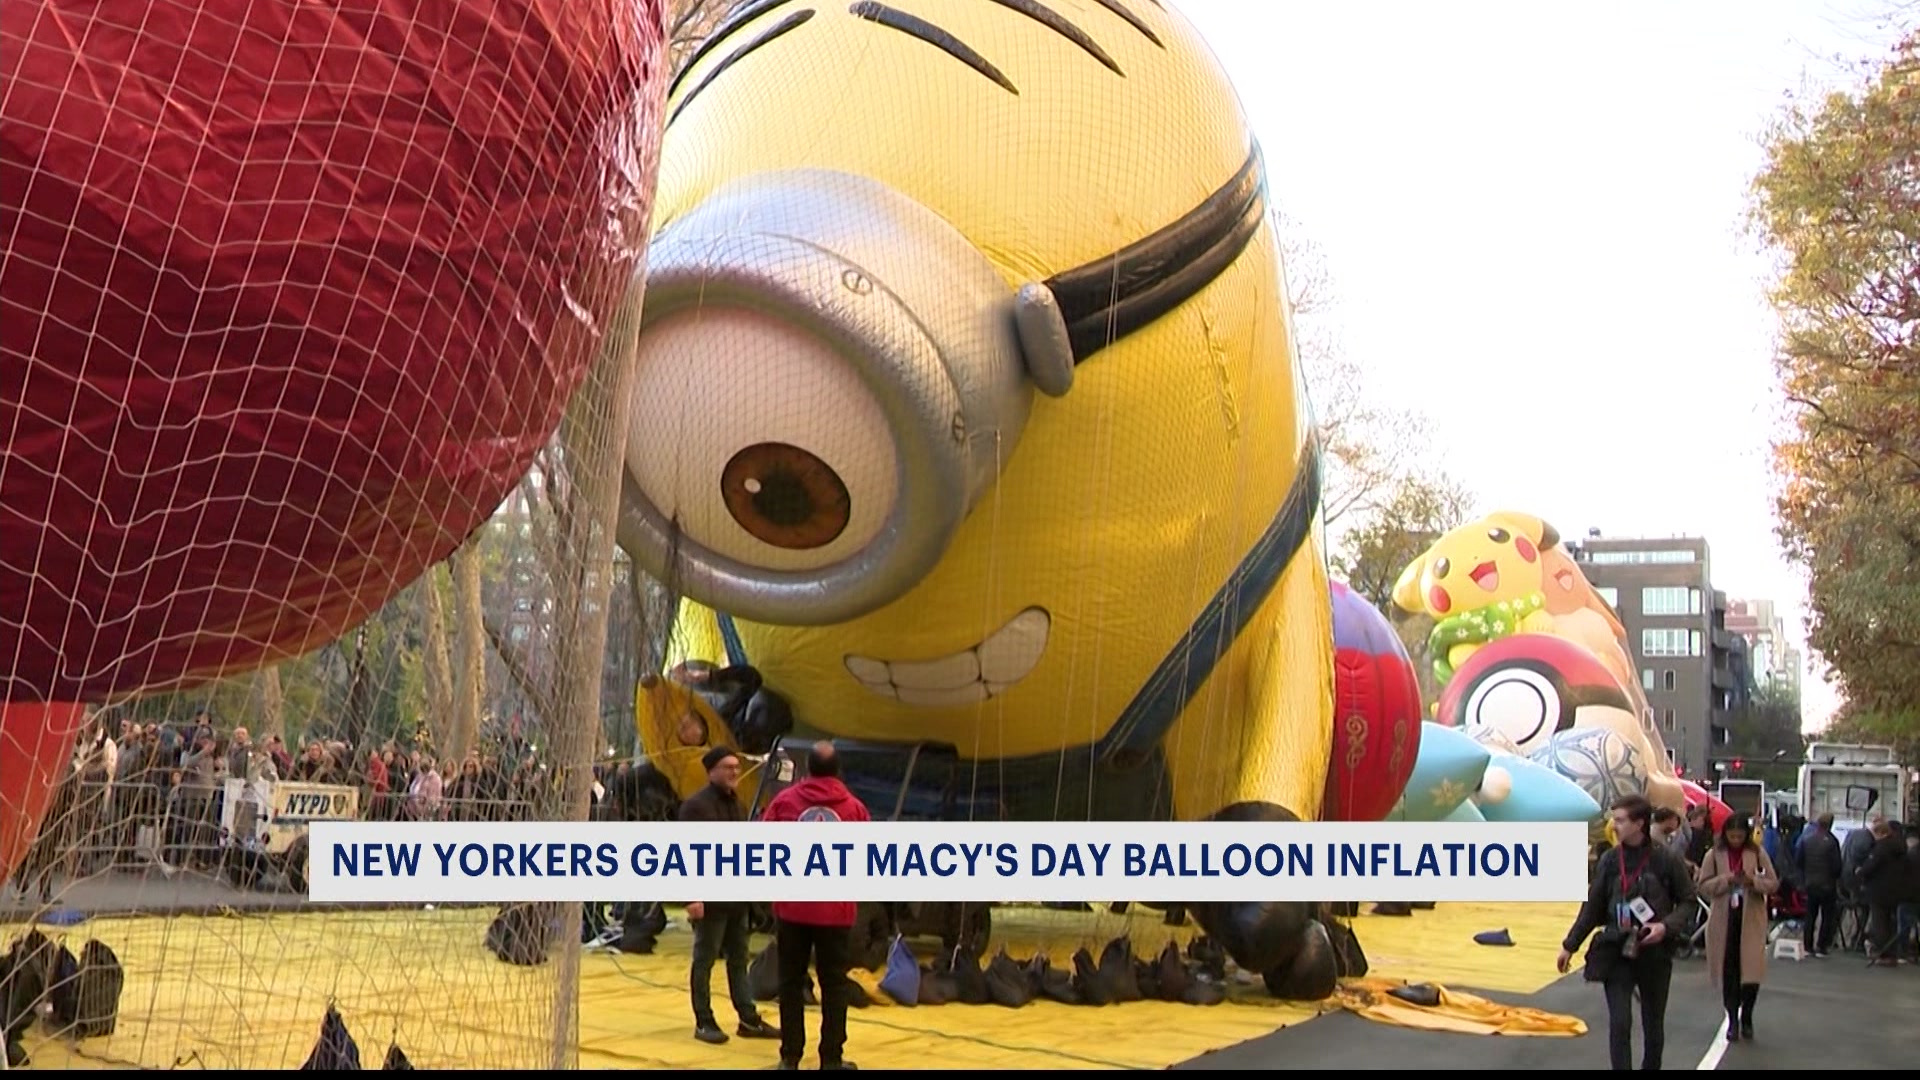 Up, up and away! Macy’s showcases balloon inflation for Thanksgiving Parade